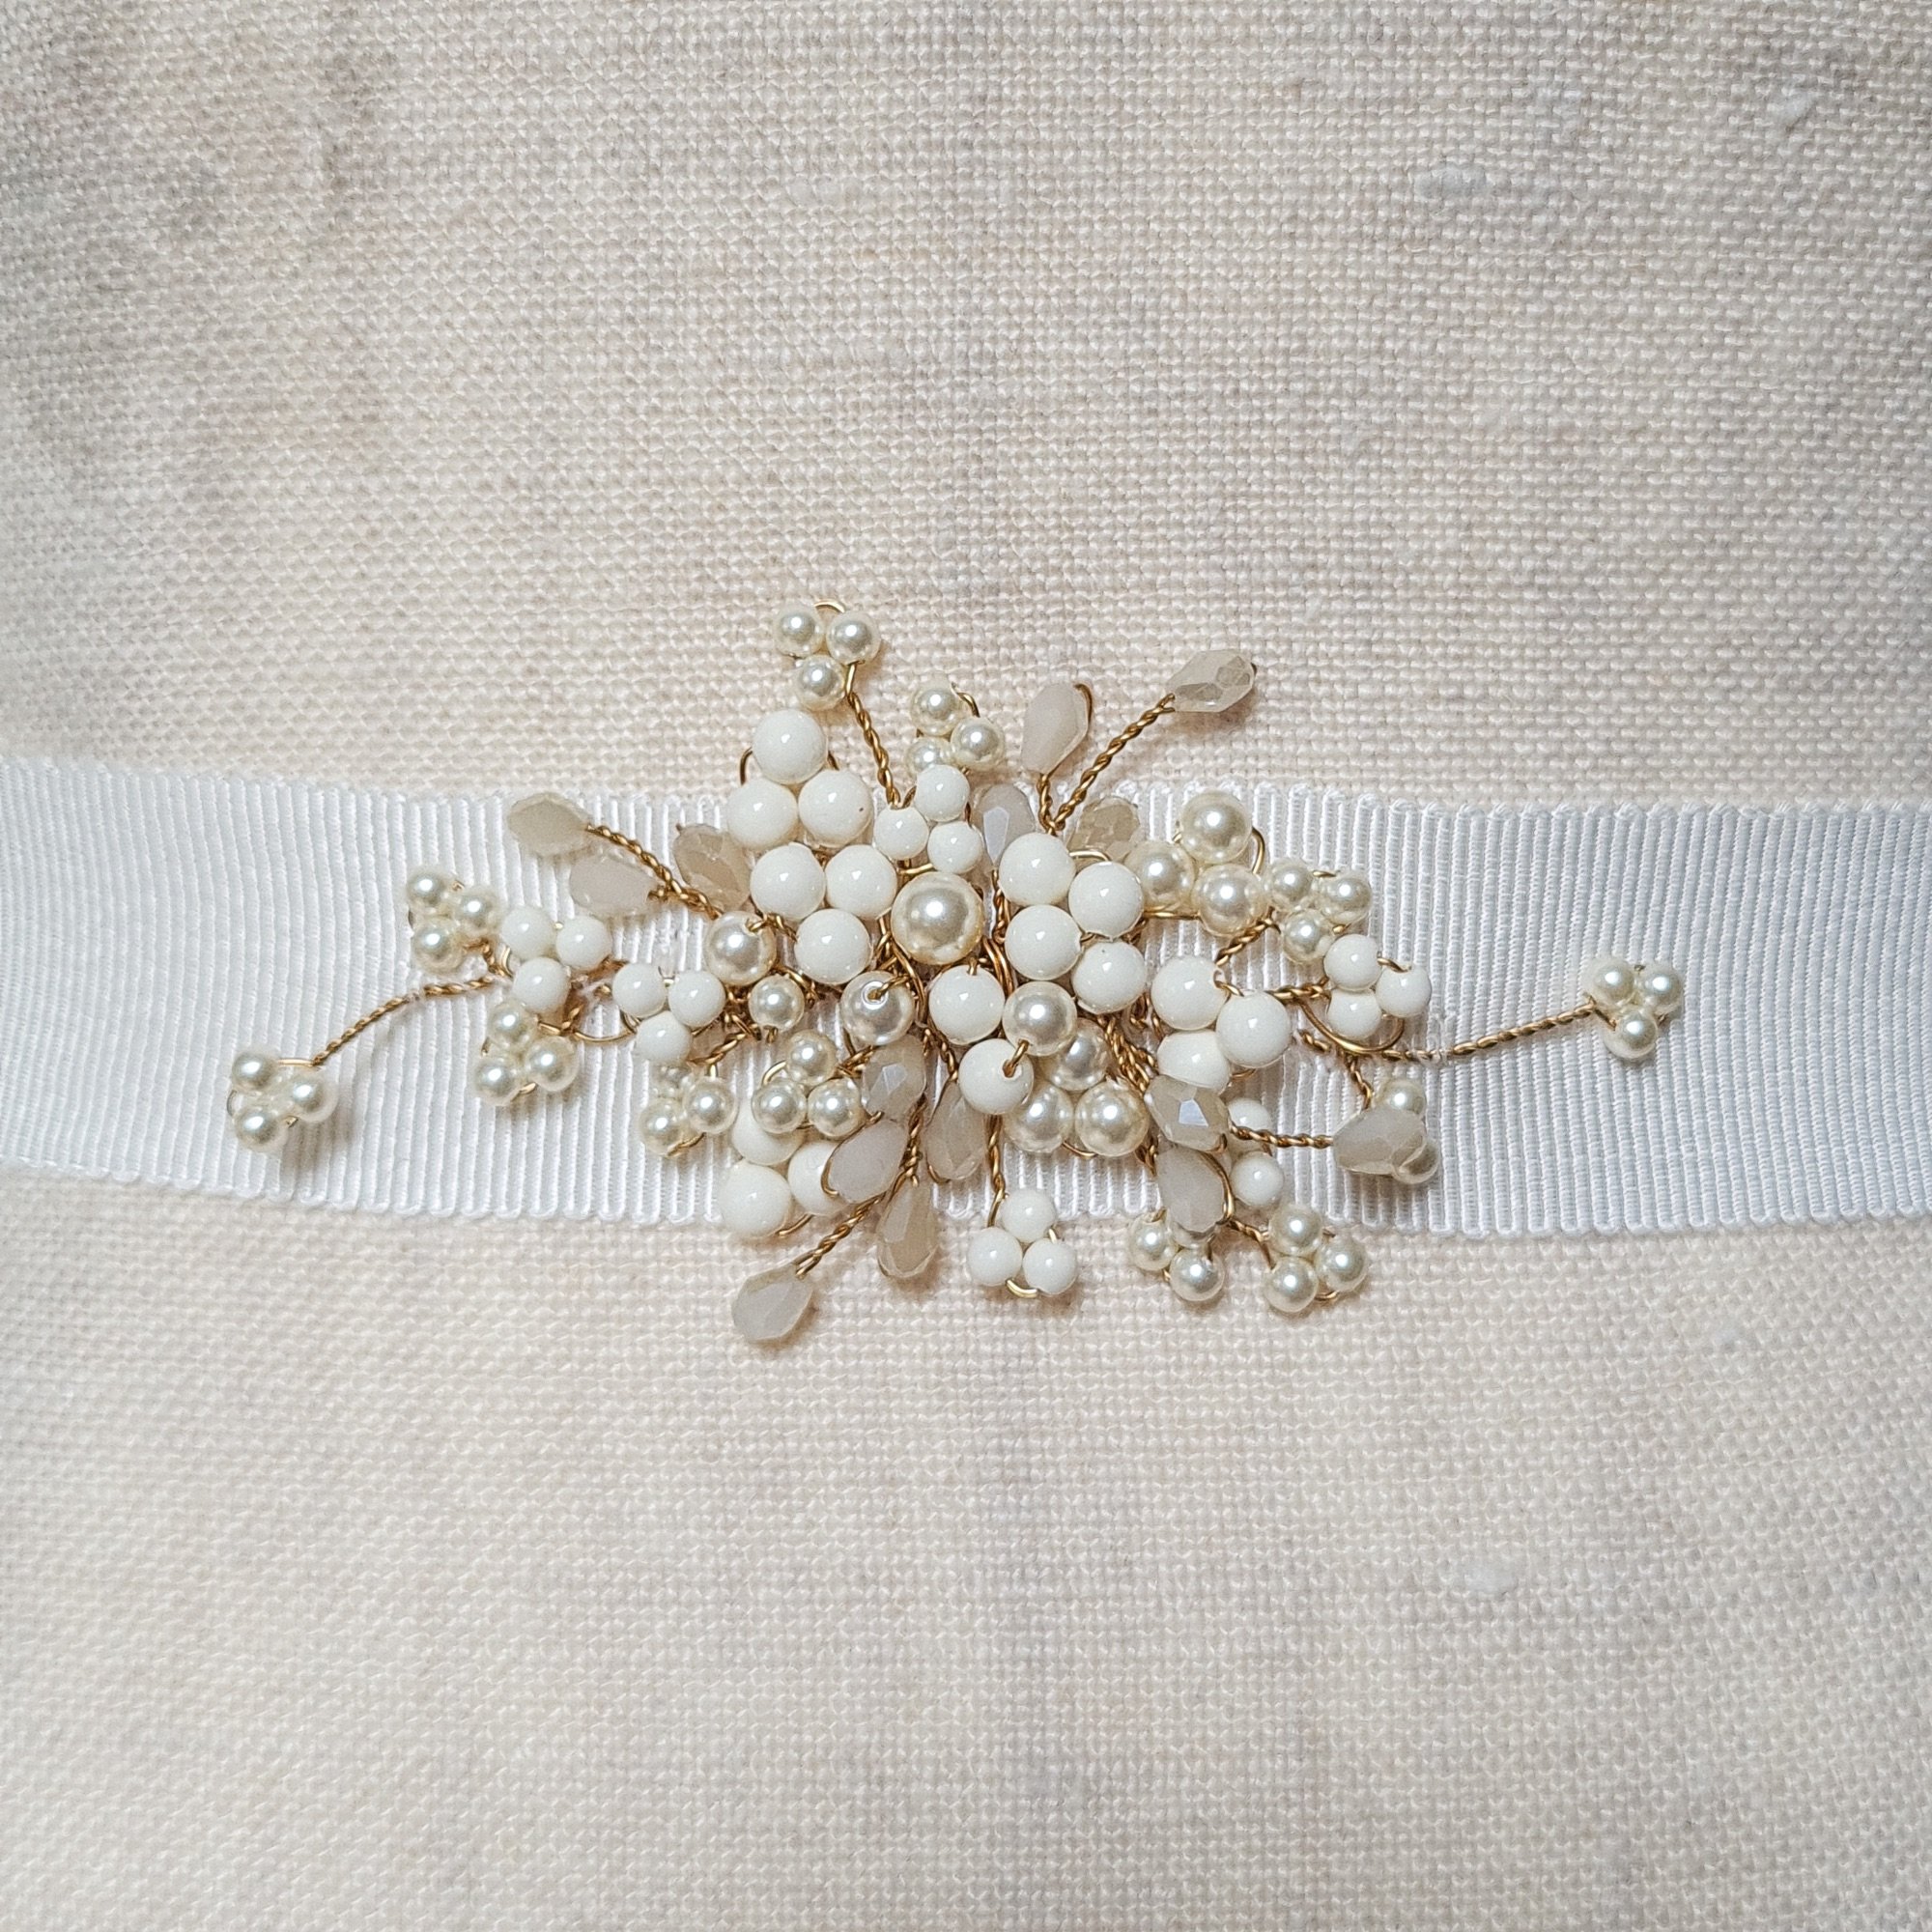 bespoke bridal sash made from ivory gloss pearls with champagne crystal